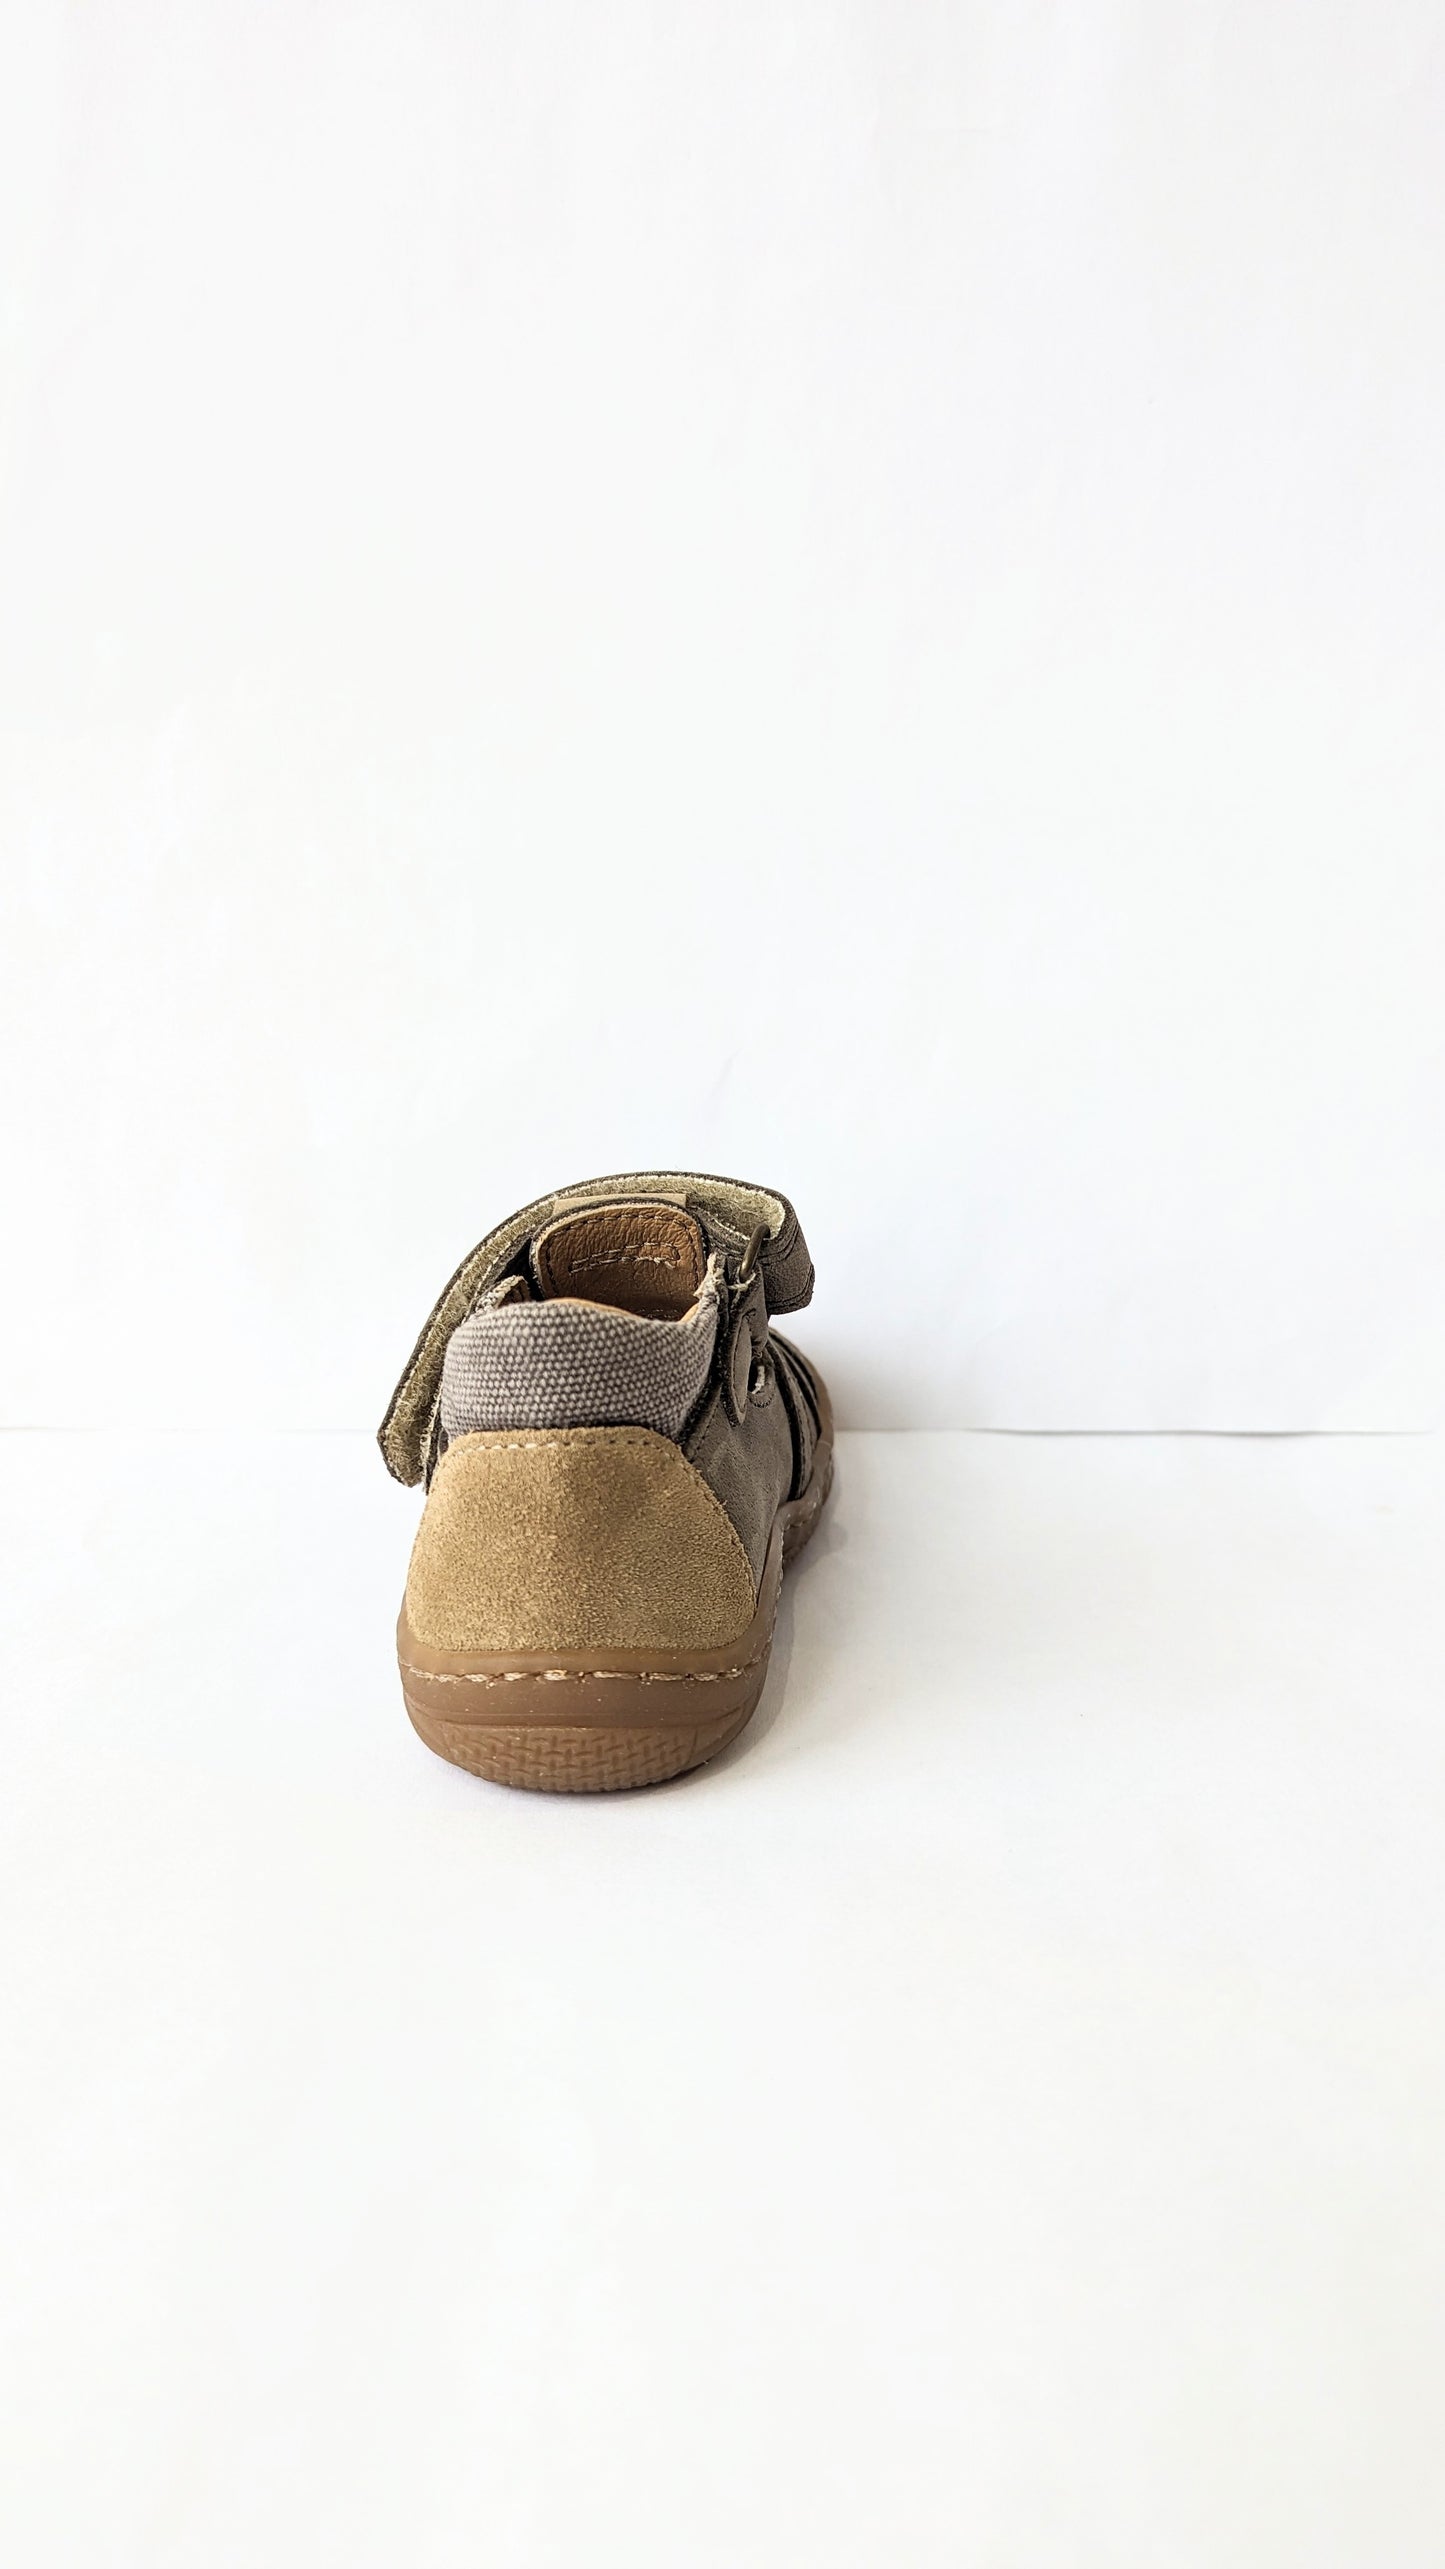 A boys shoe by Bopy, style Jacour, in khaki nubuck with double velcro fastening and toe bumper. Back view.